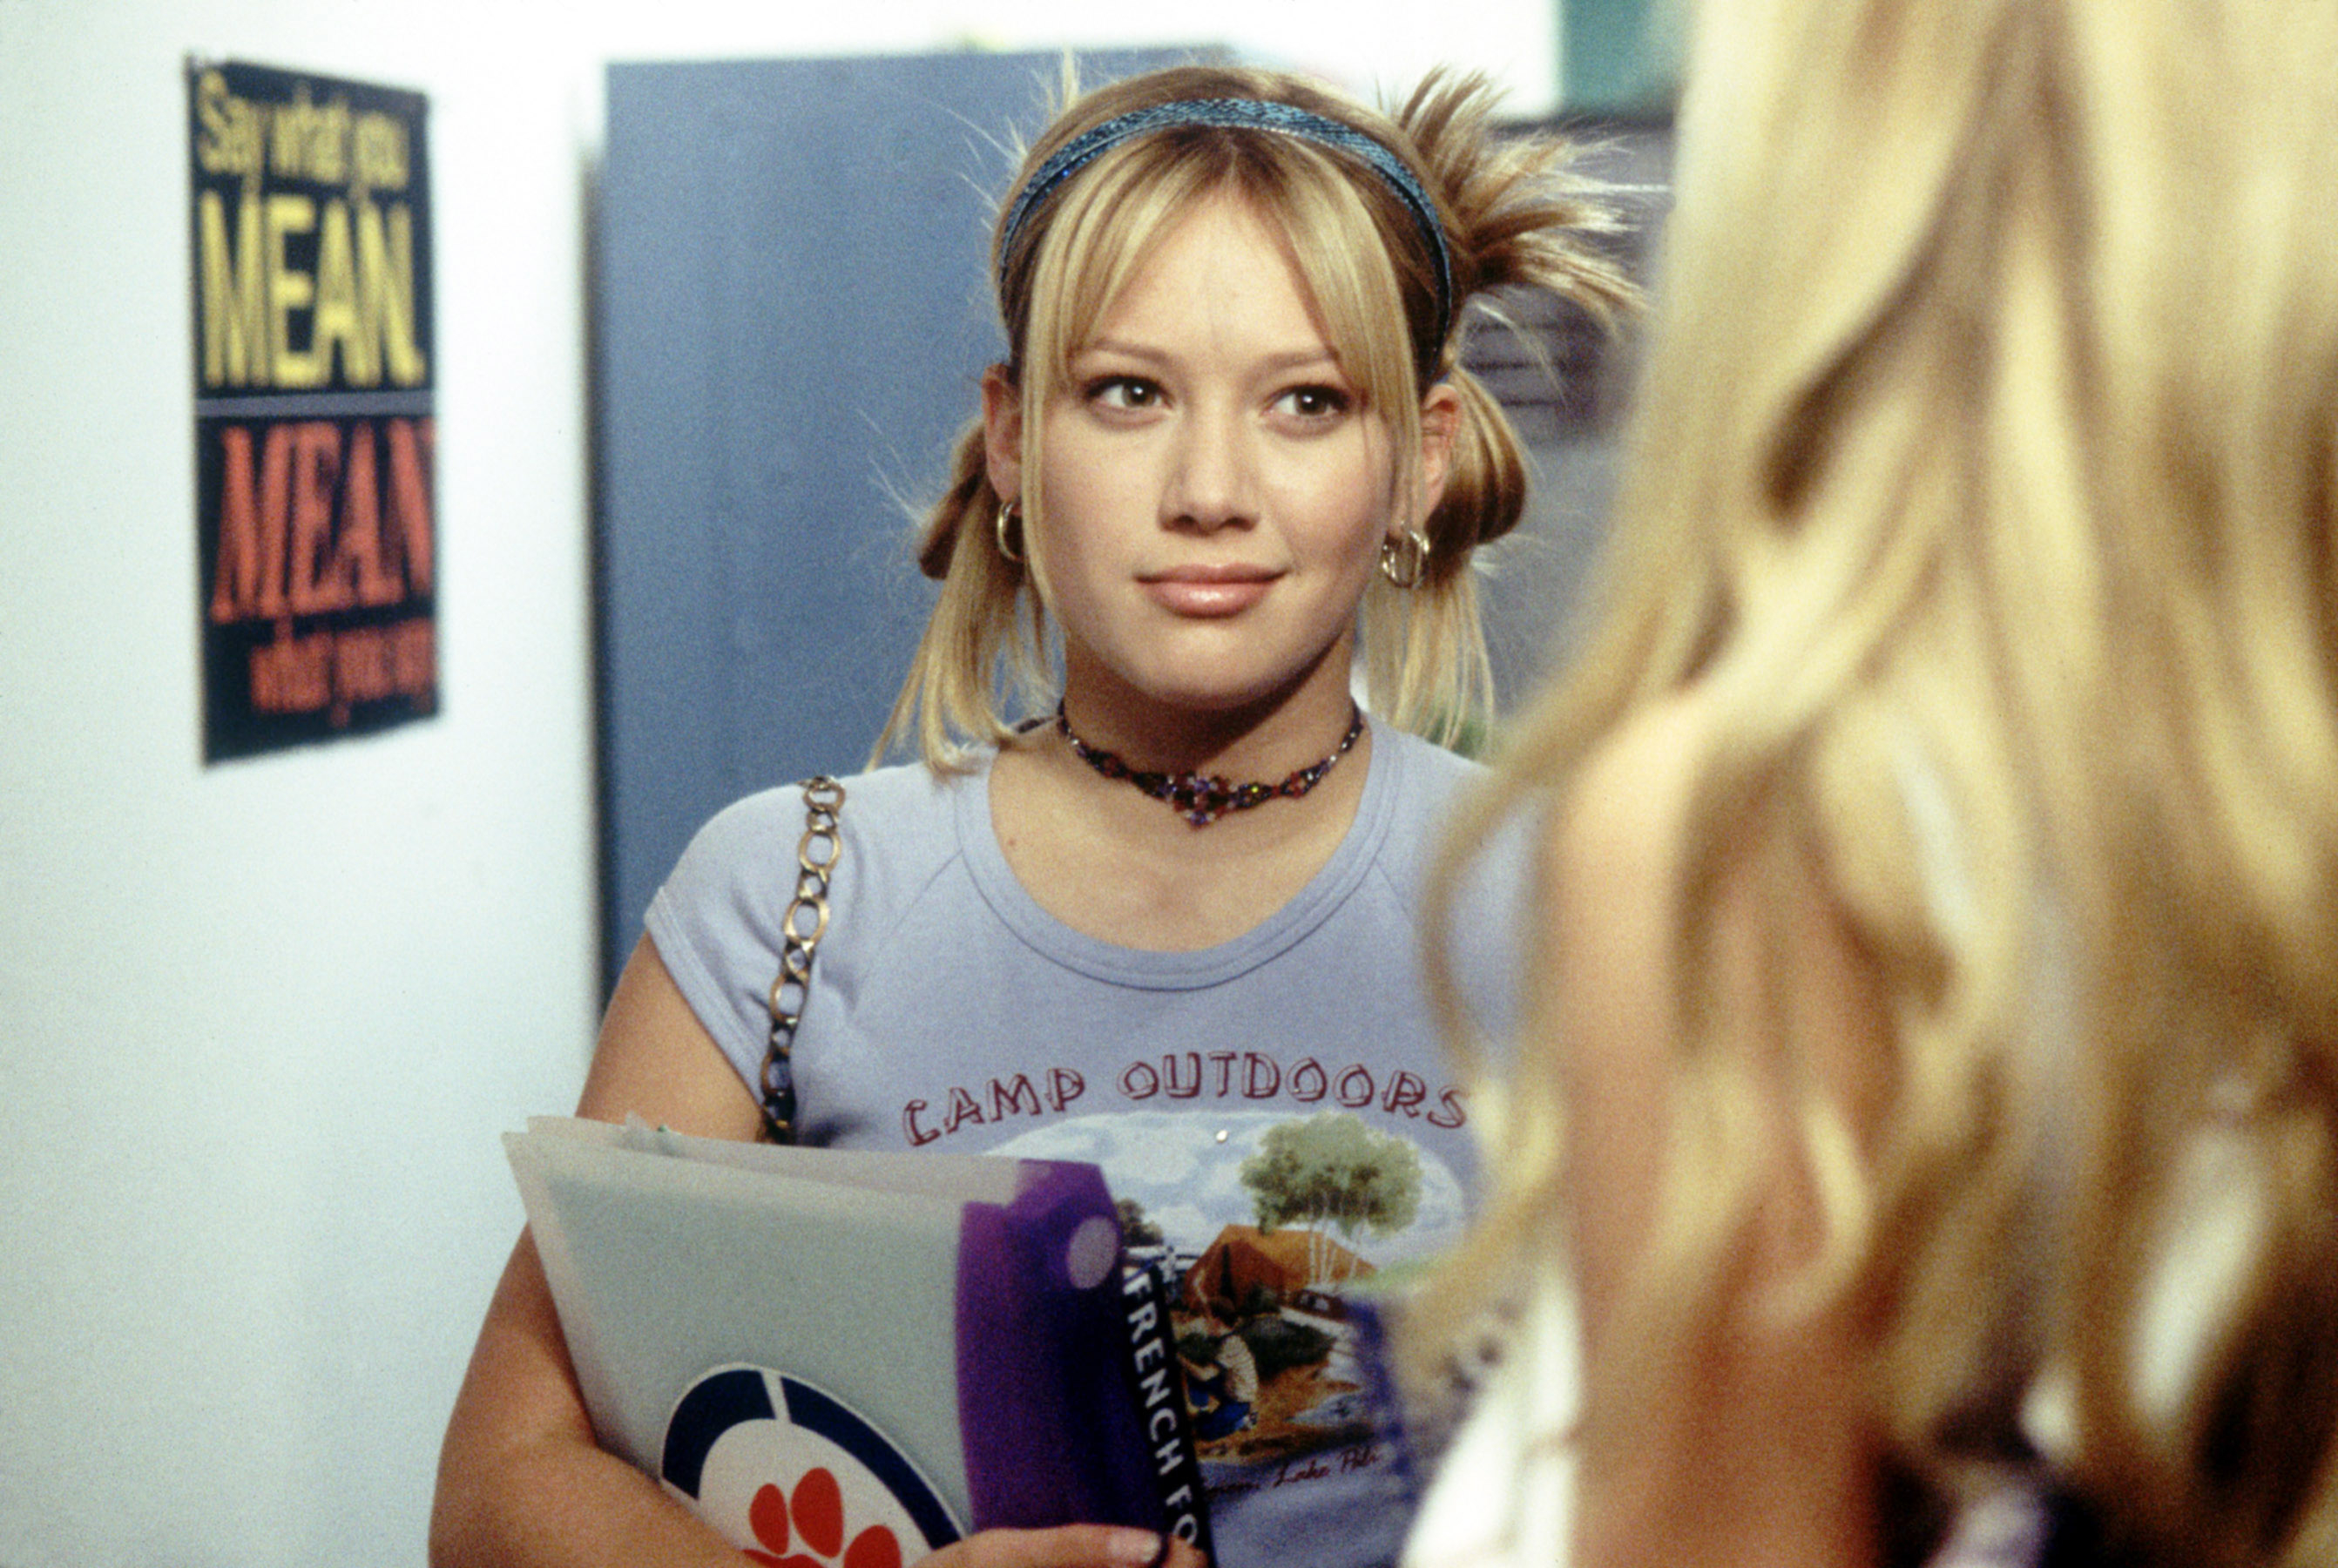 Hilary as Lizzie in a school hallway in a scene from the show